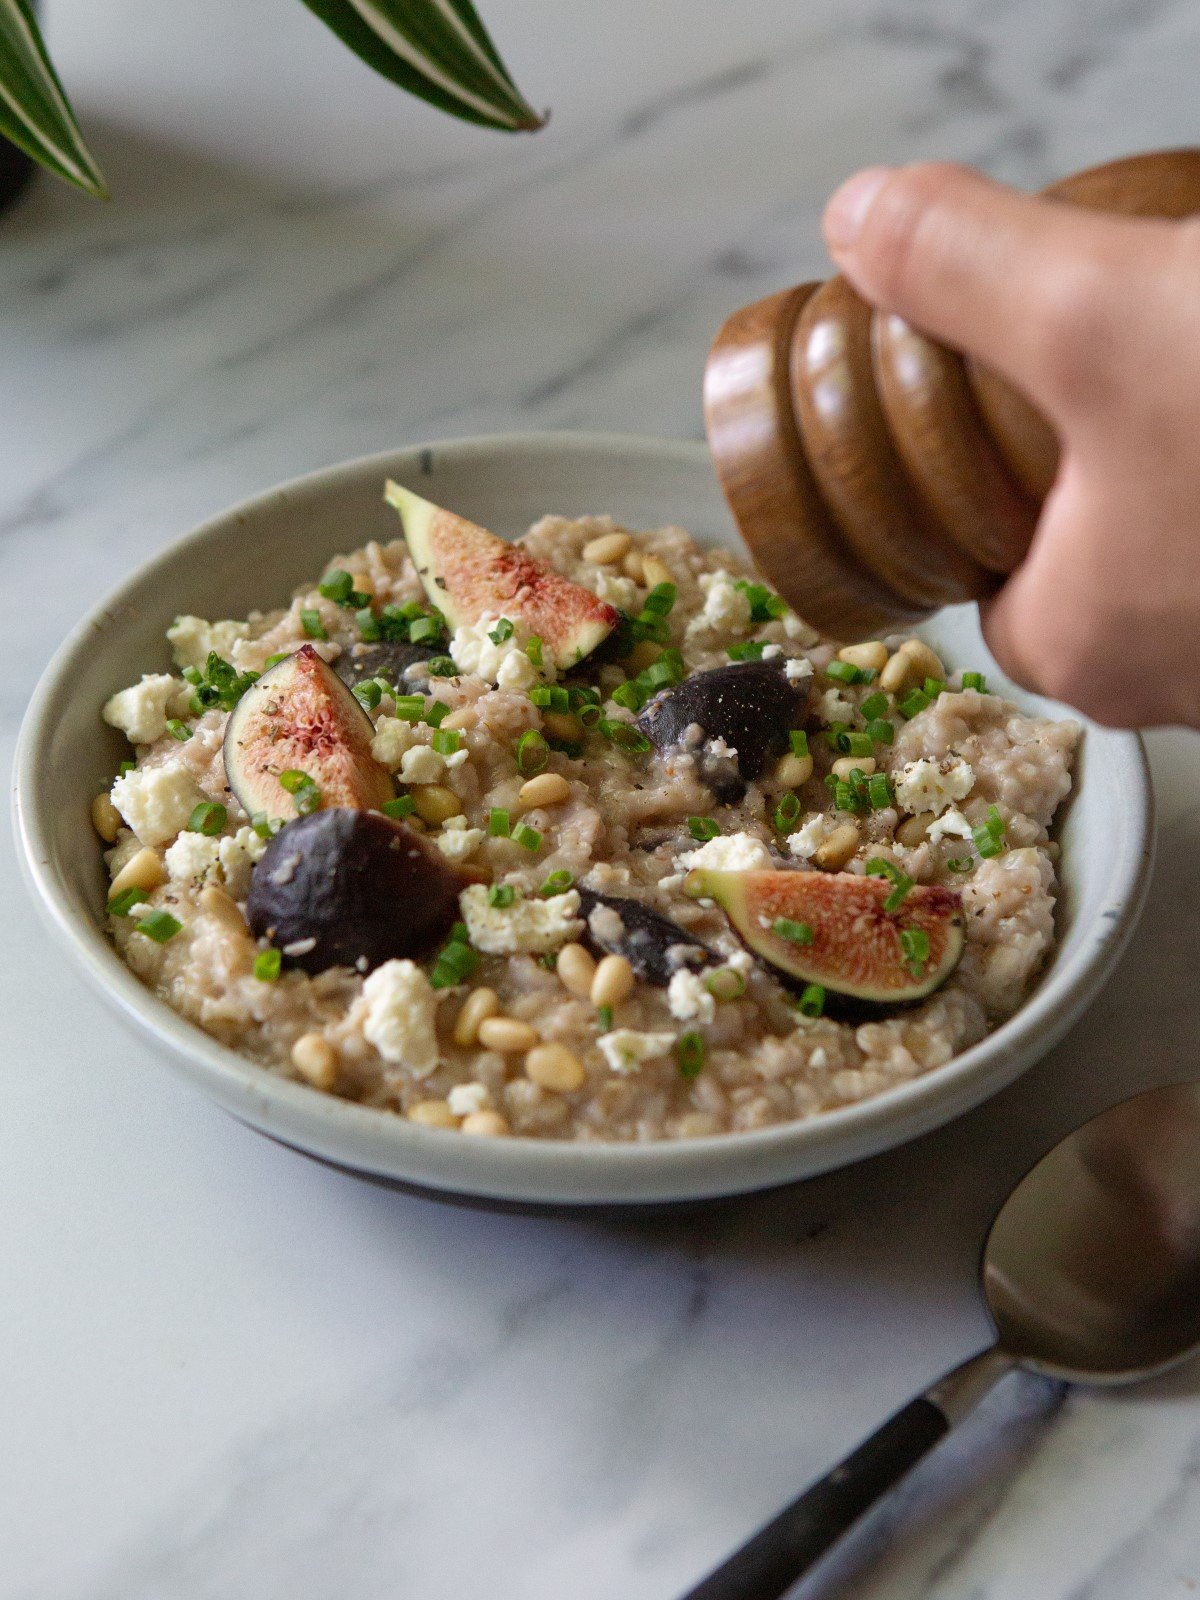 A white bowl filled with savory oatmeal with figs and feta and a spoon. A hand is holding a black pepper grinder.